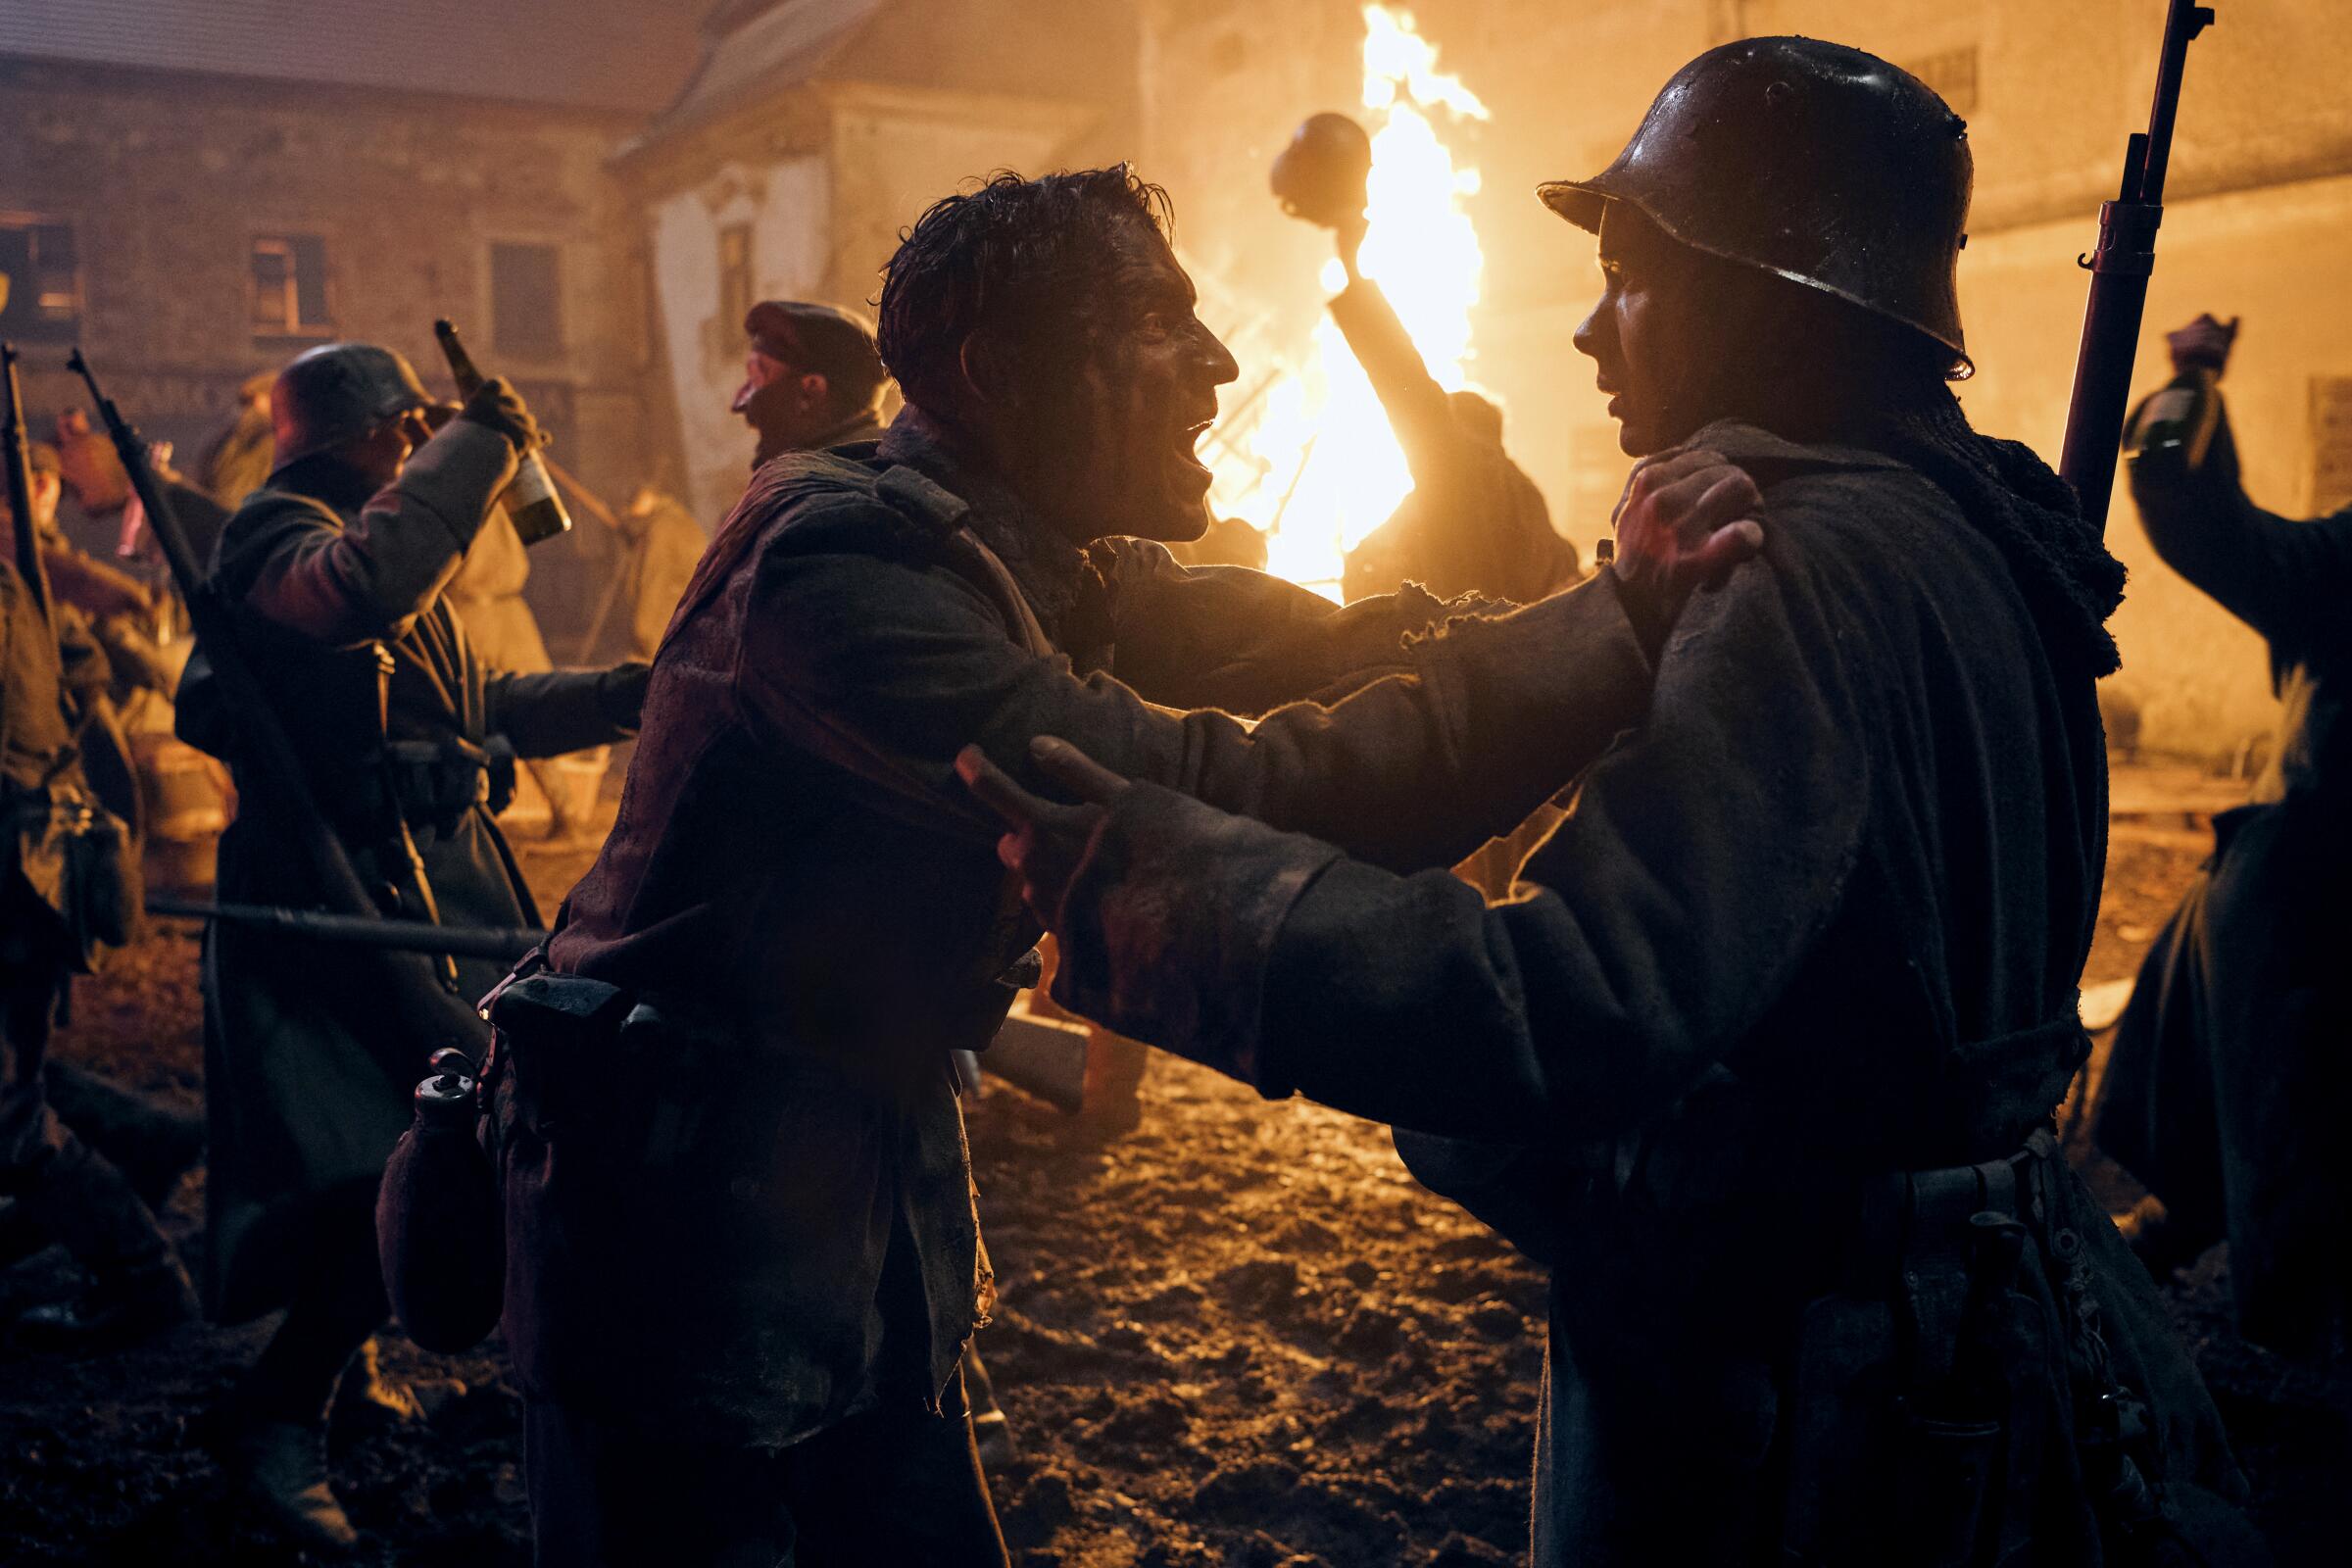 Two soldiers shout amid fires and celebrating in "All Quiet on the Western Front."